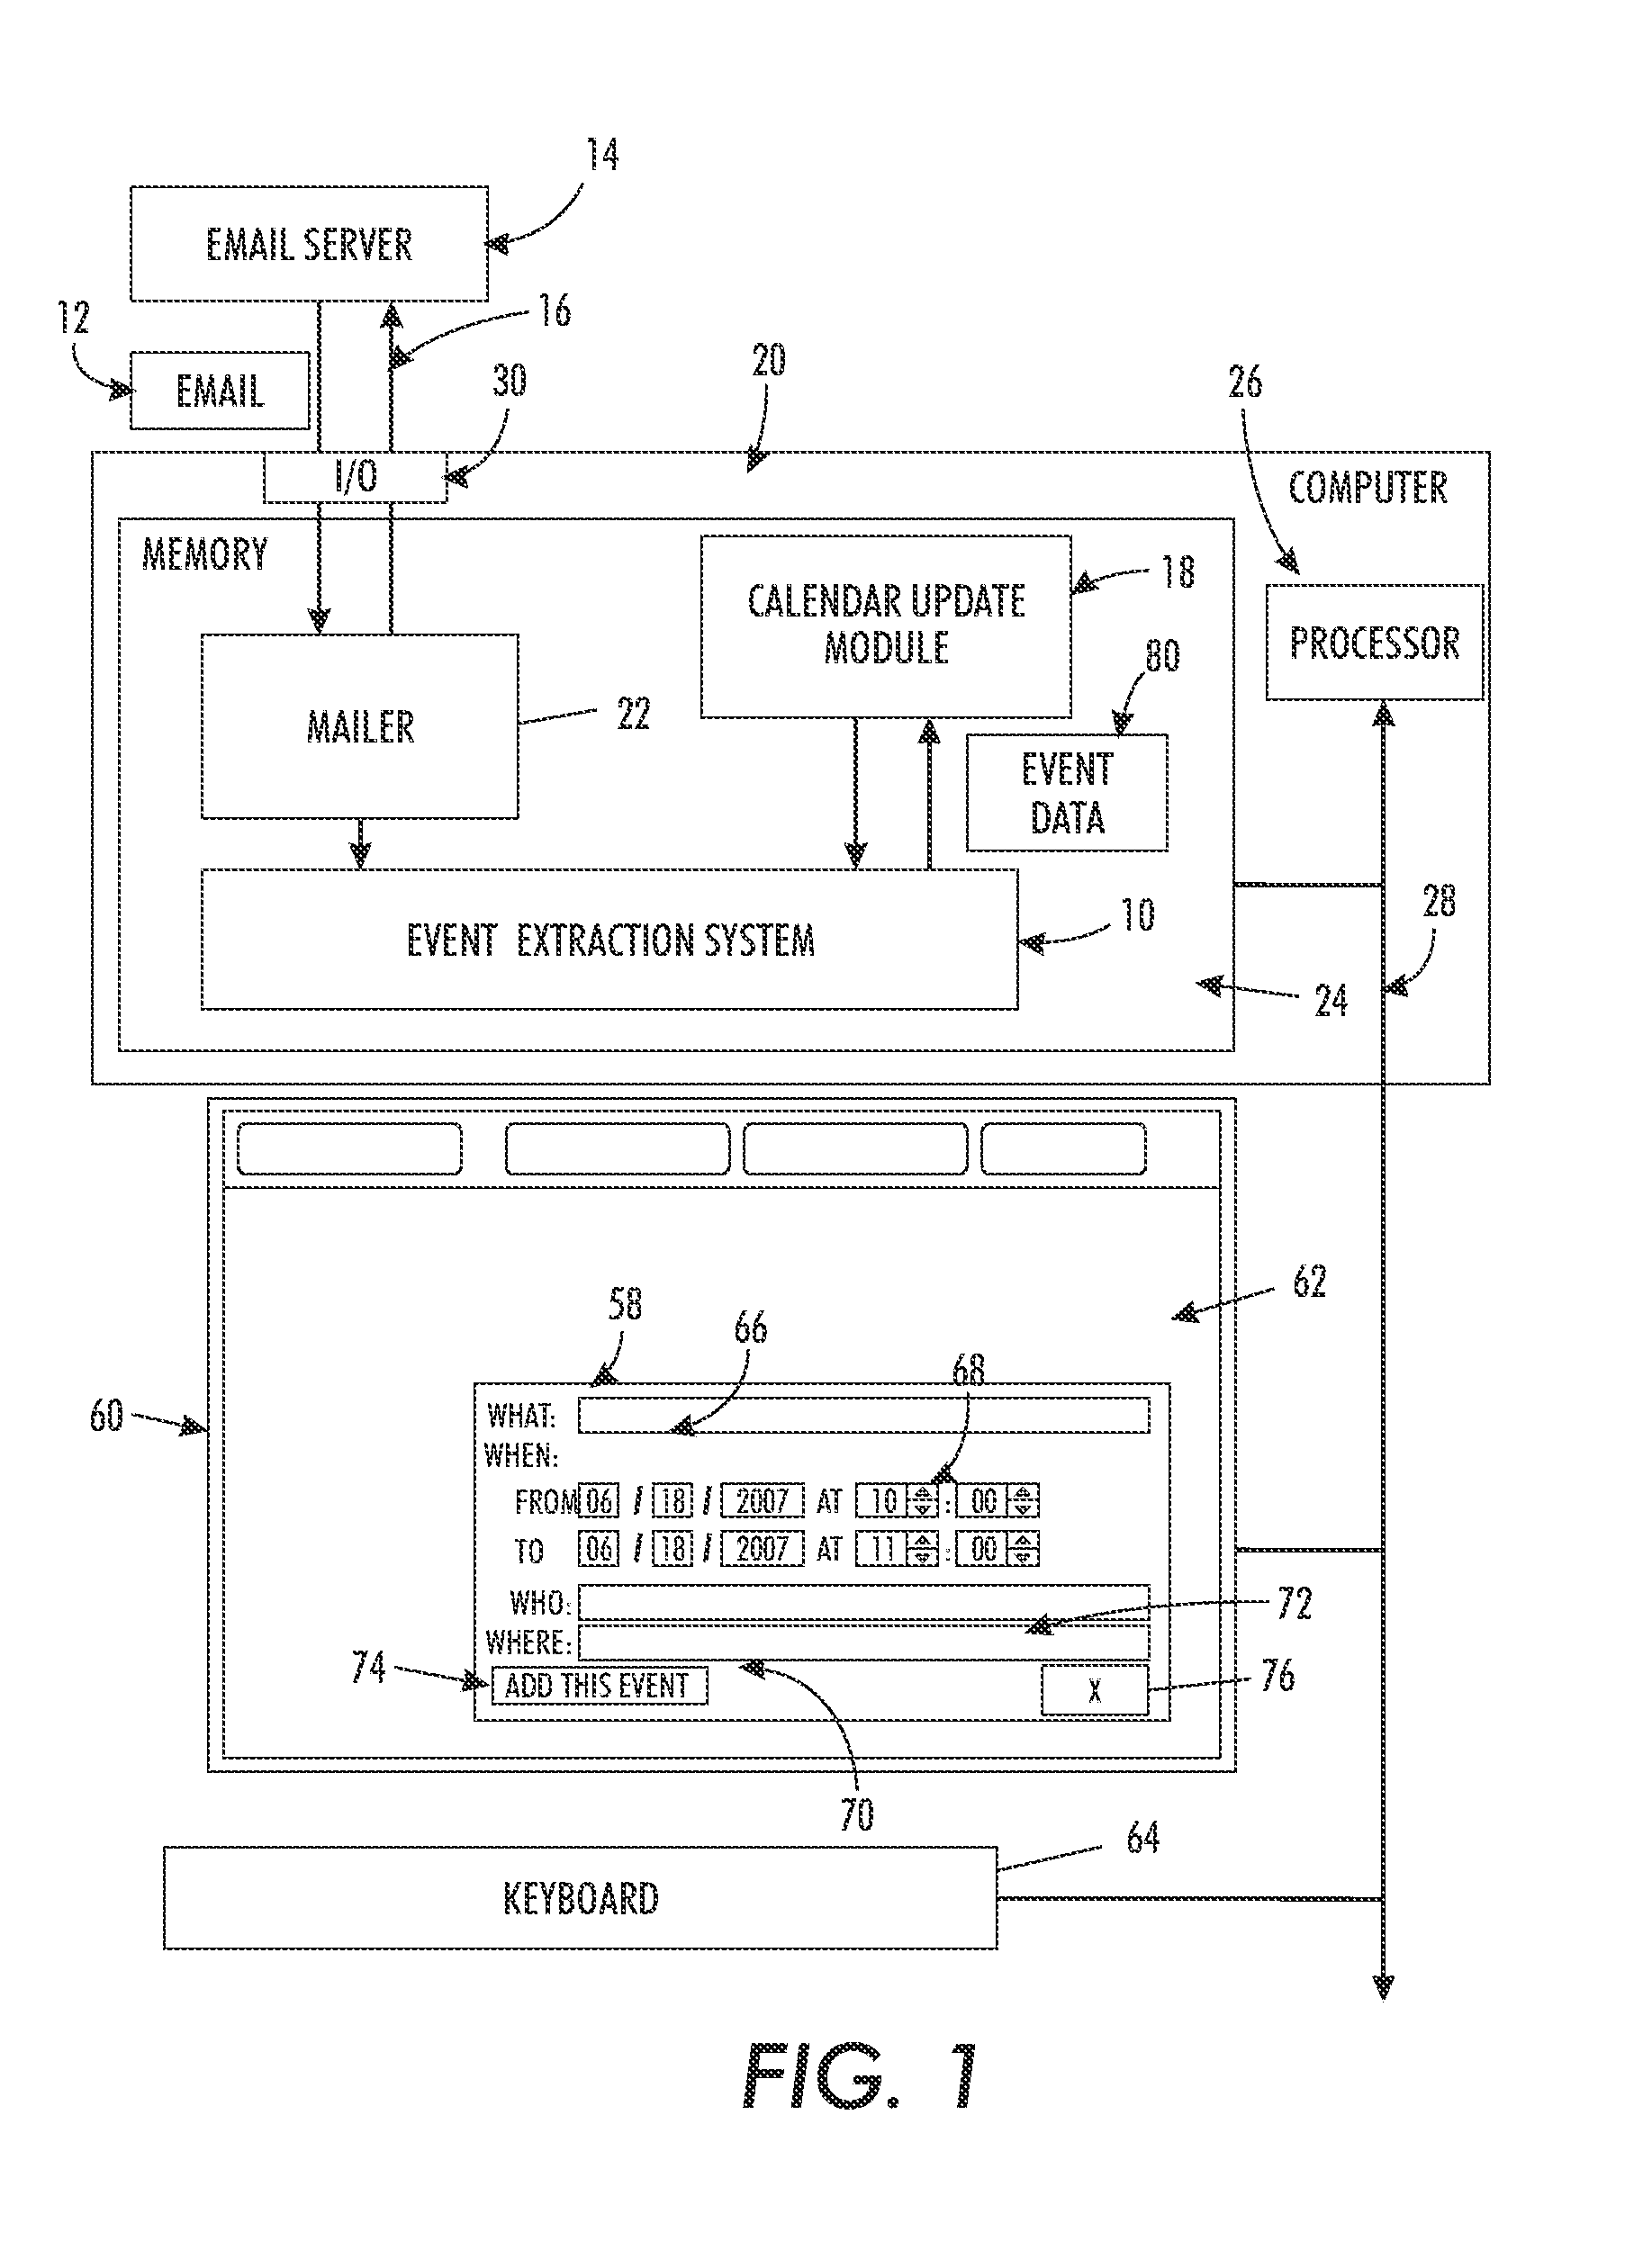 Event extraction system for electronic messages